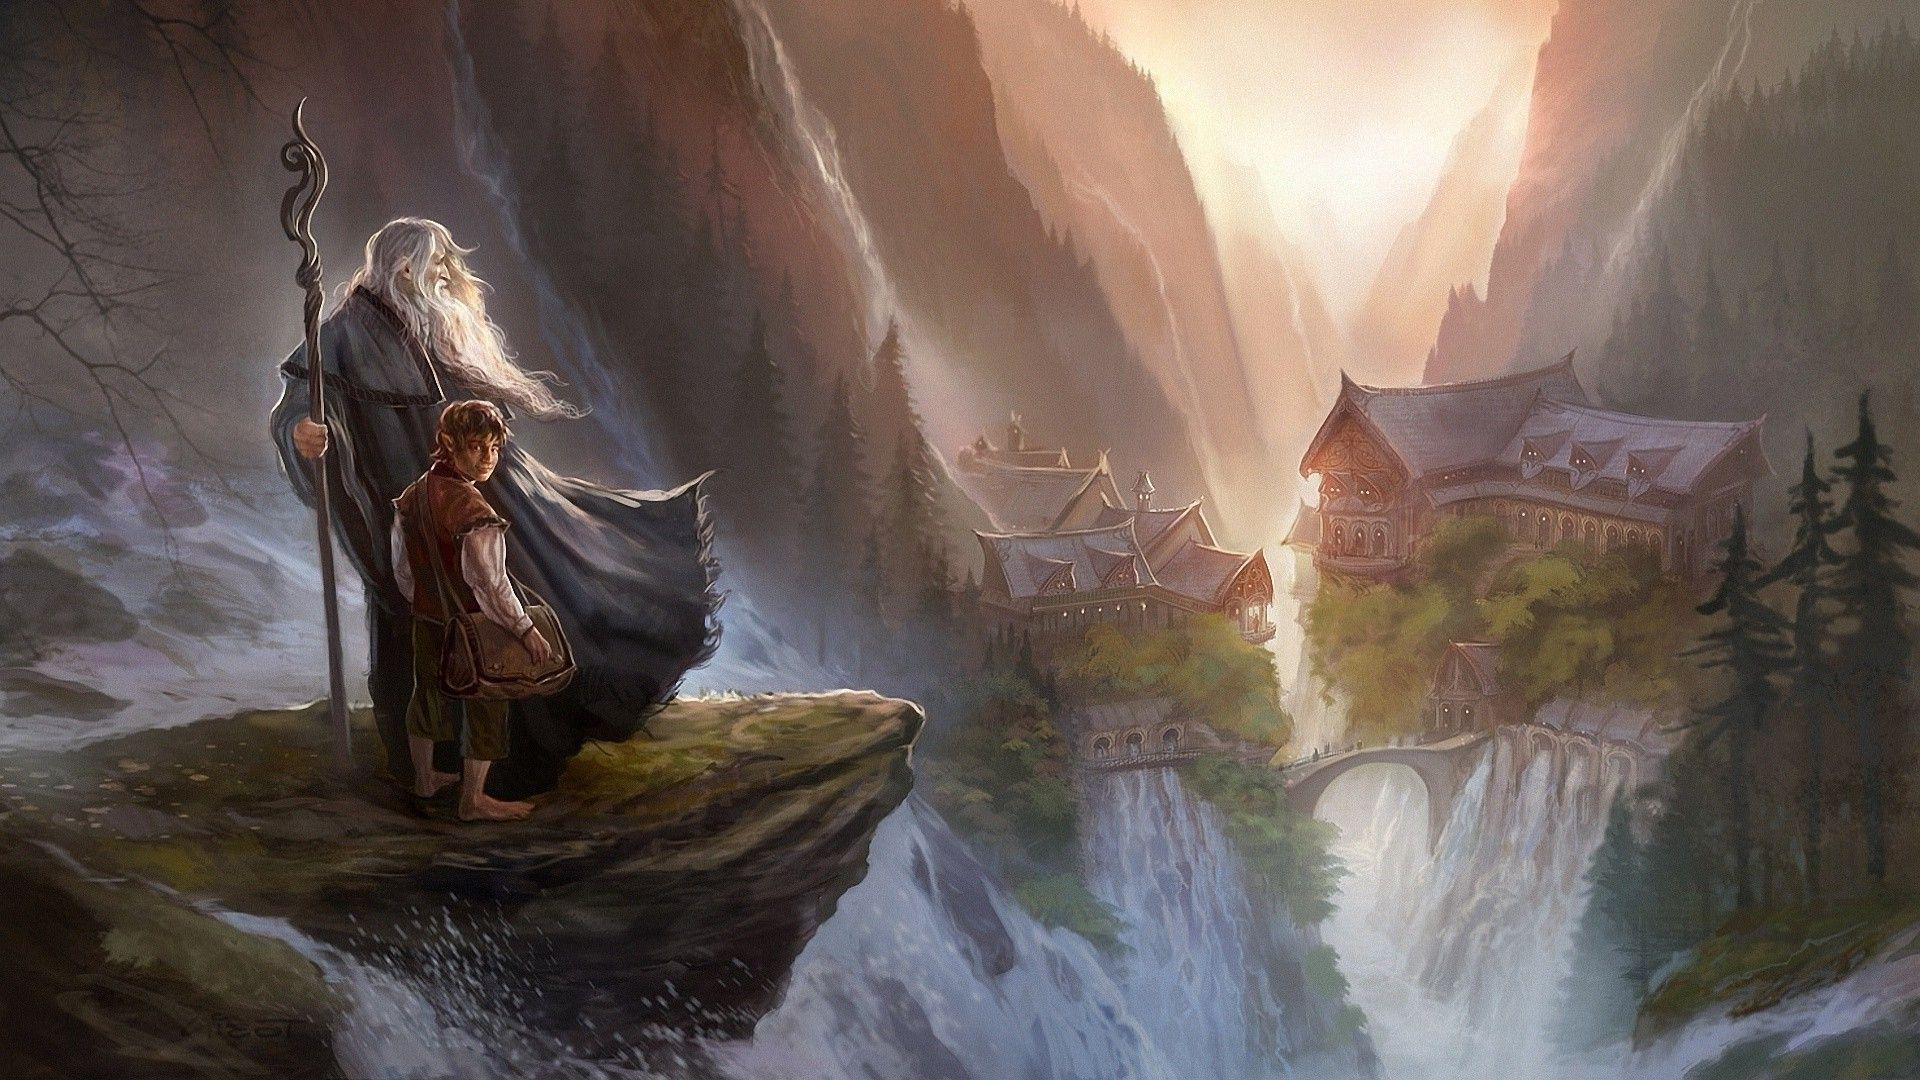 Lord Of The Rings Art Wallpapers Top, Lord Of The Rings Landscape Art